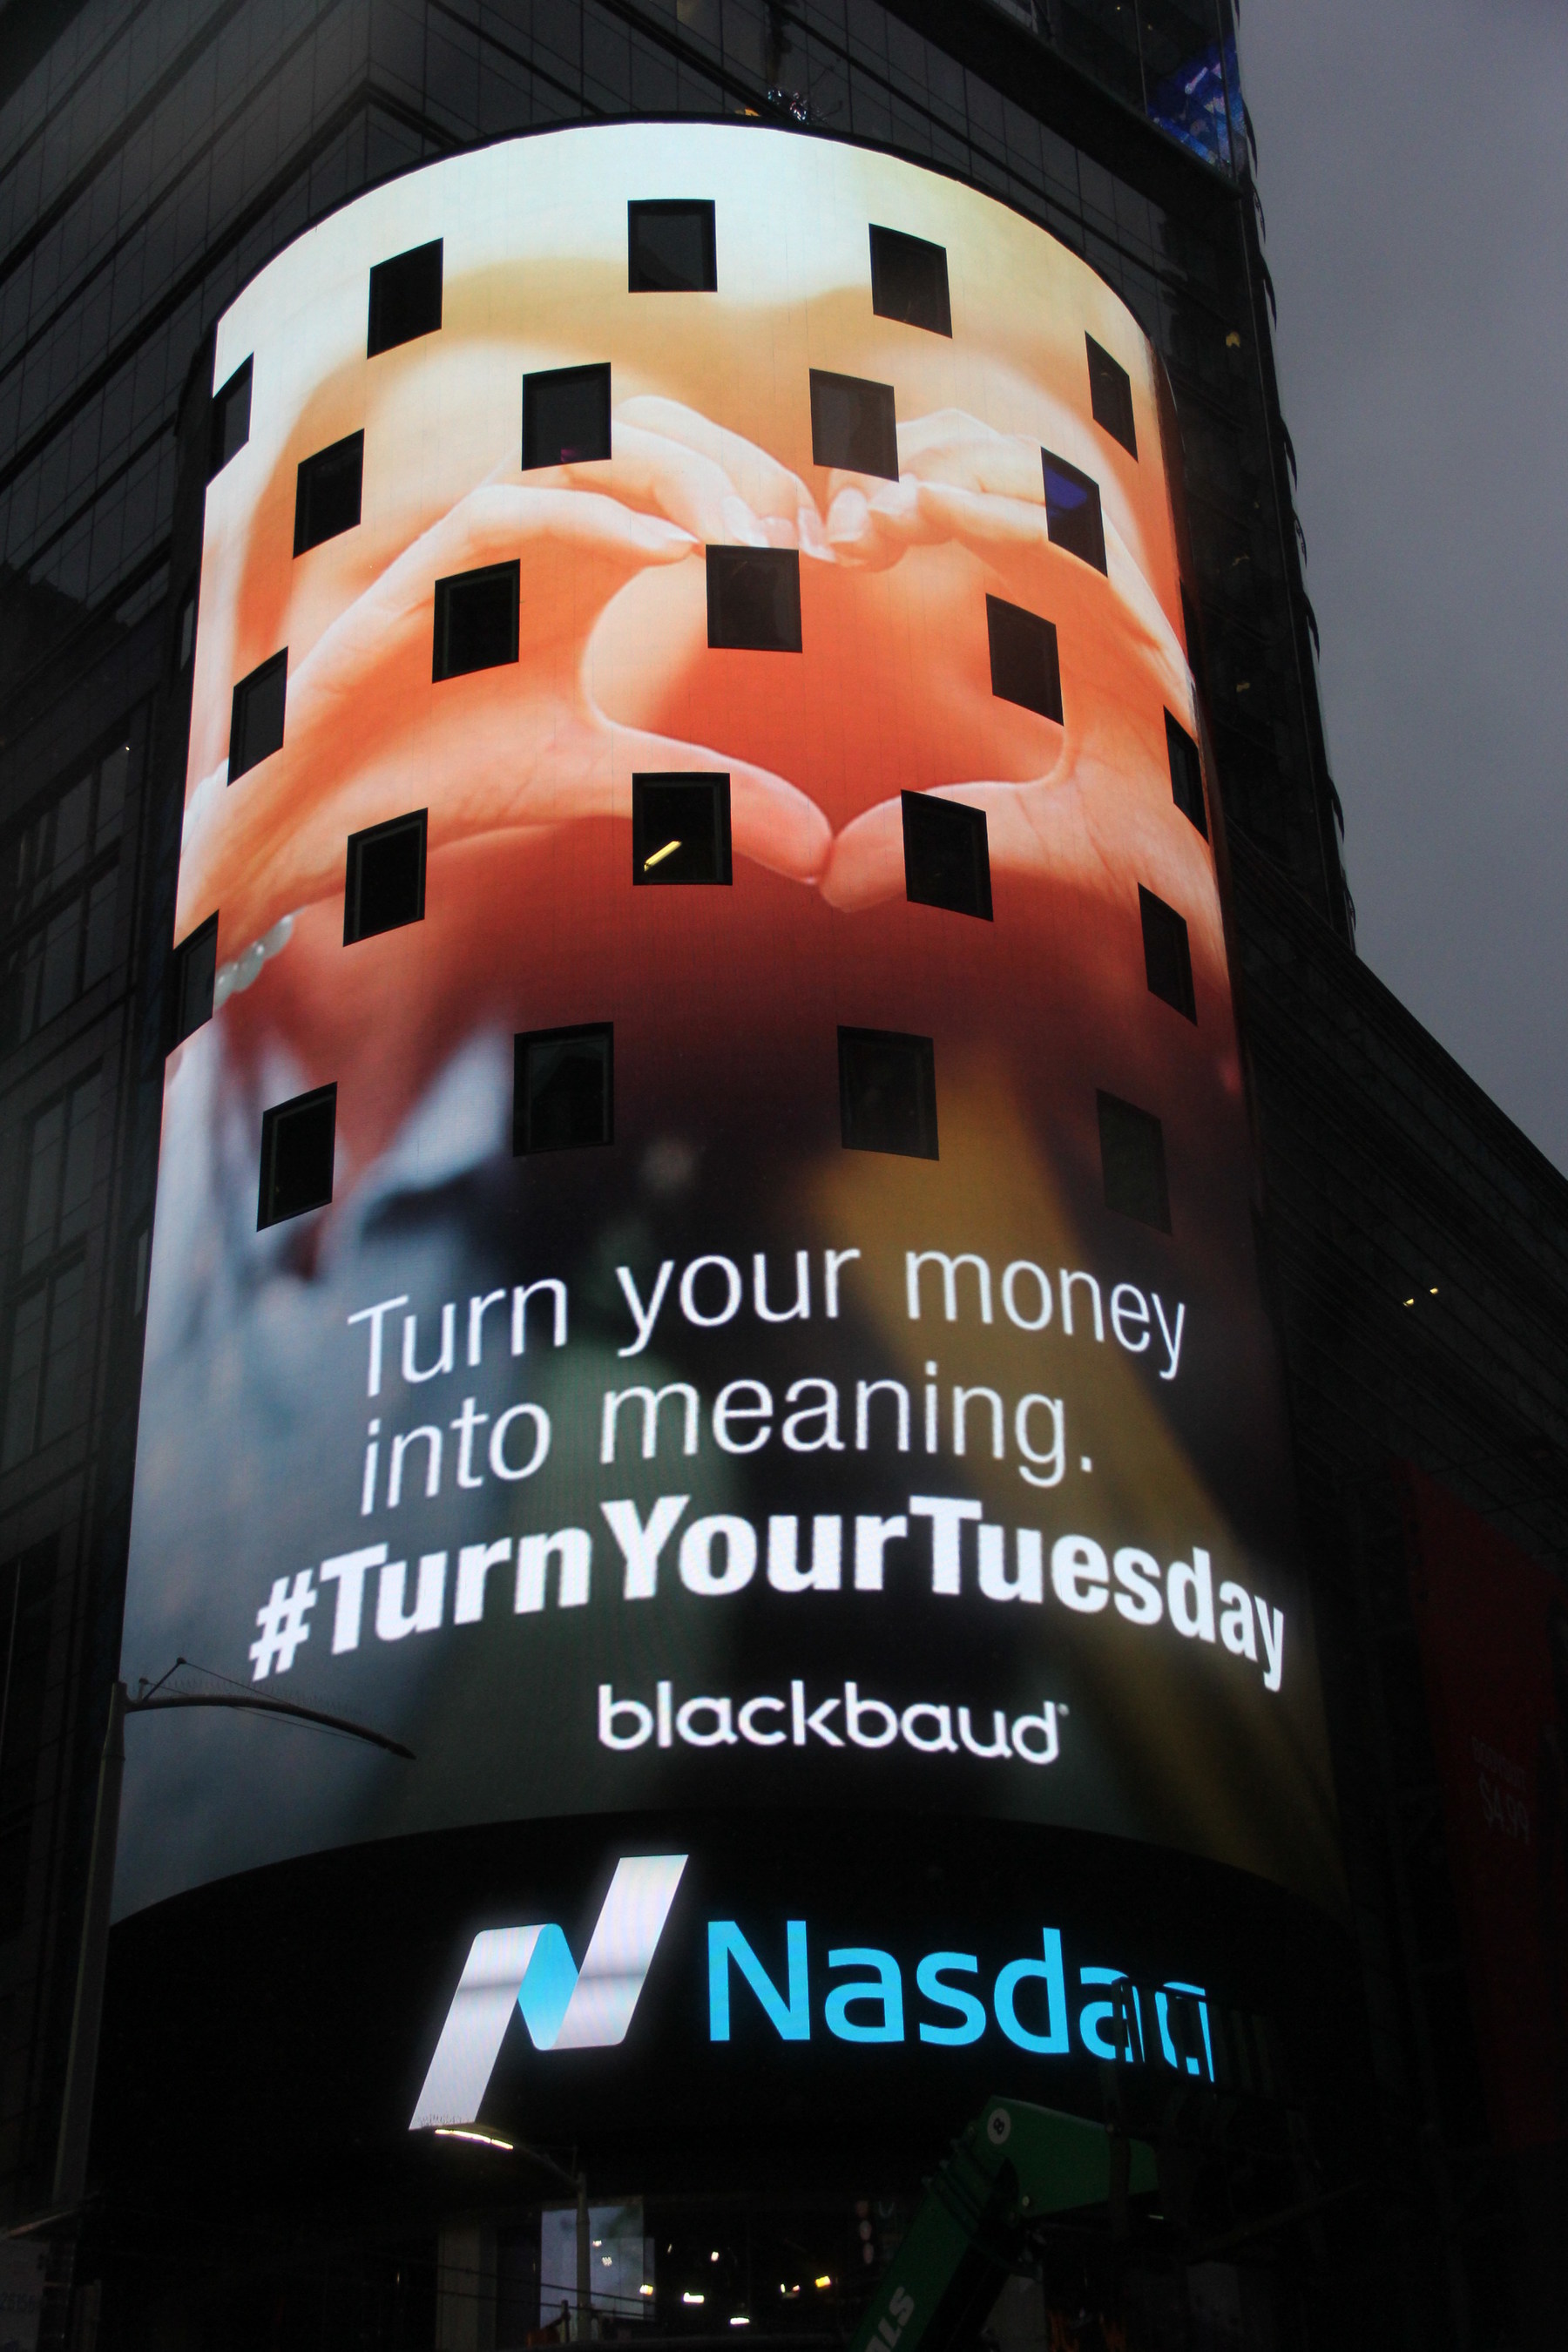 Blackbaud is takes over the Nasdaq tower at Times Square to promote what its customers are doing for #GivingTuesday. Turn your money into meaning with Blackbaud on this #GivingTuesday